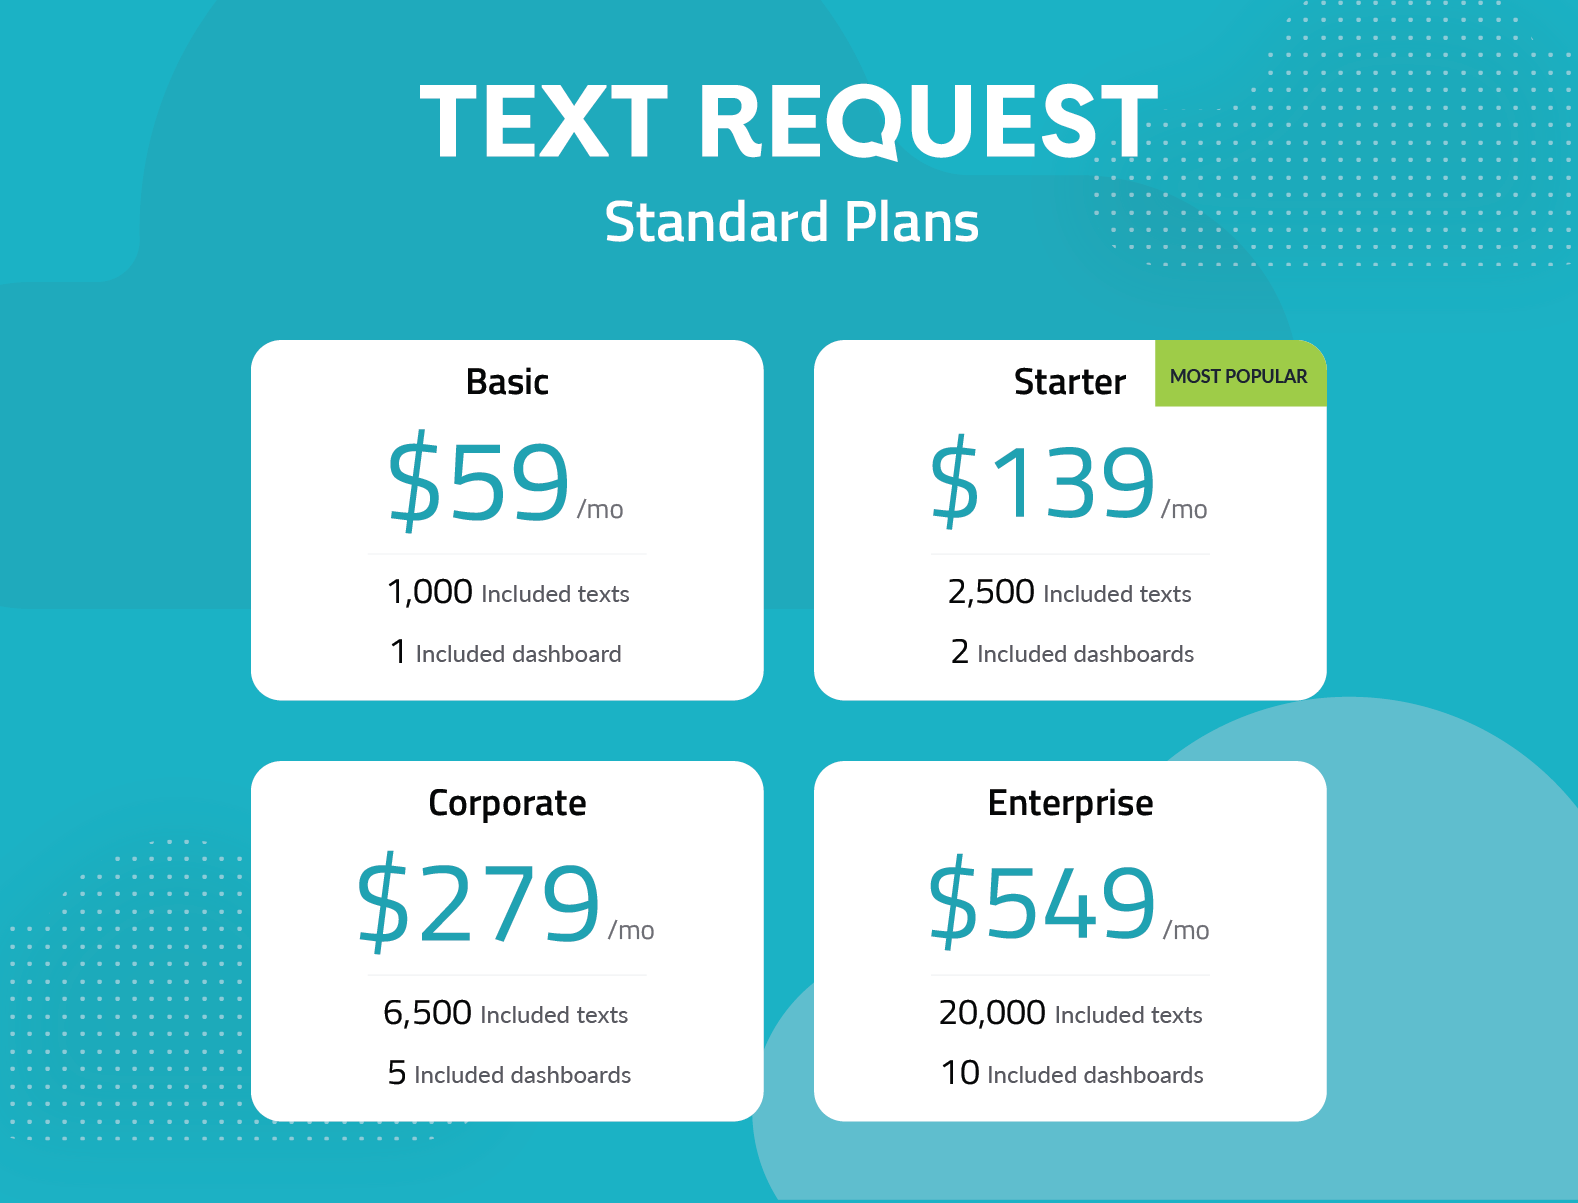 Text Request's Pricing Page.
Need more Texts per month? Reach out to Sales@textrequest.com